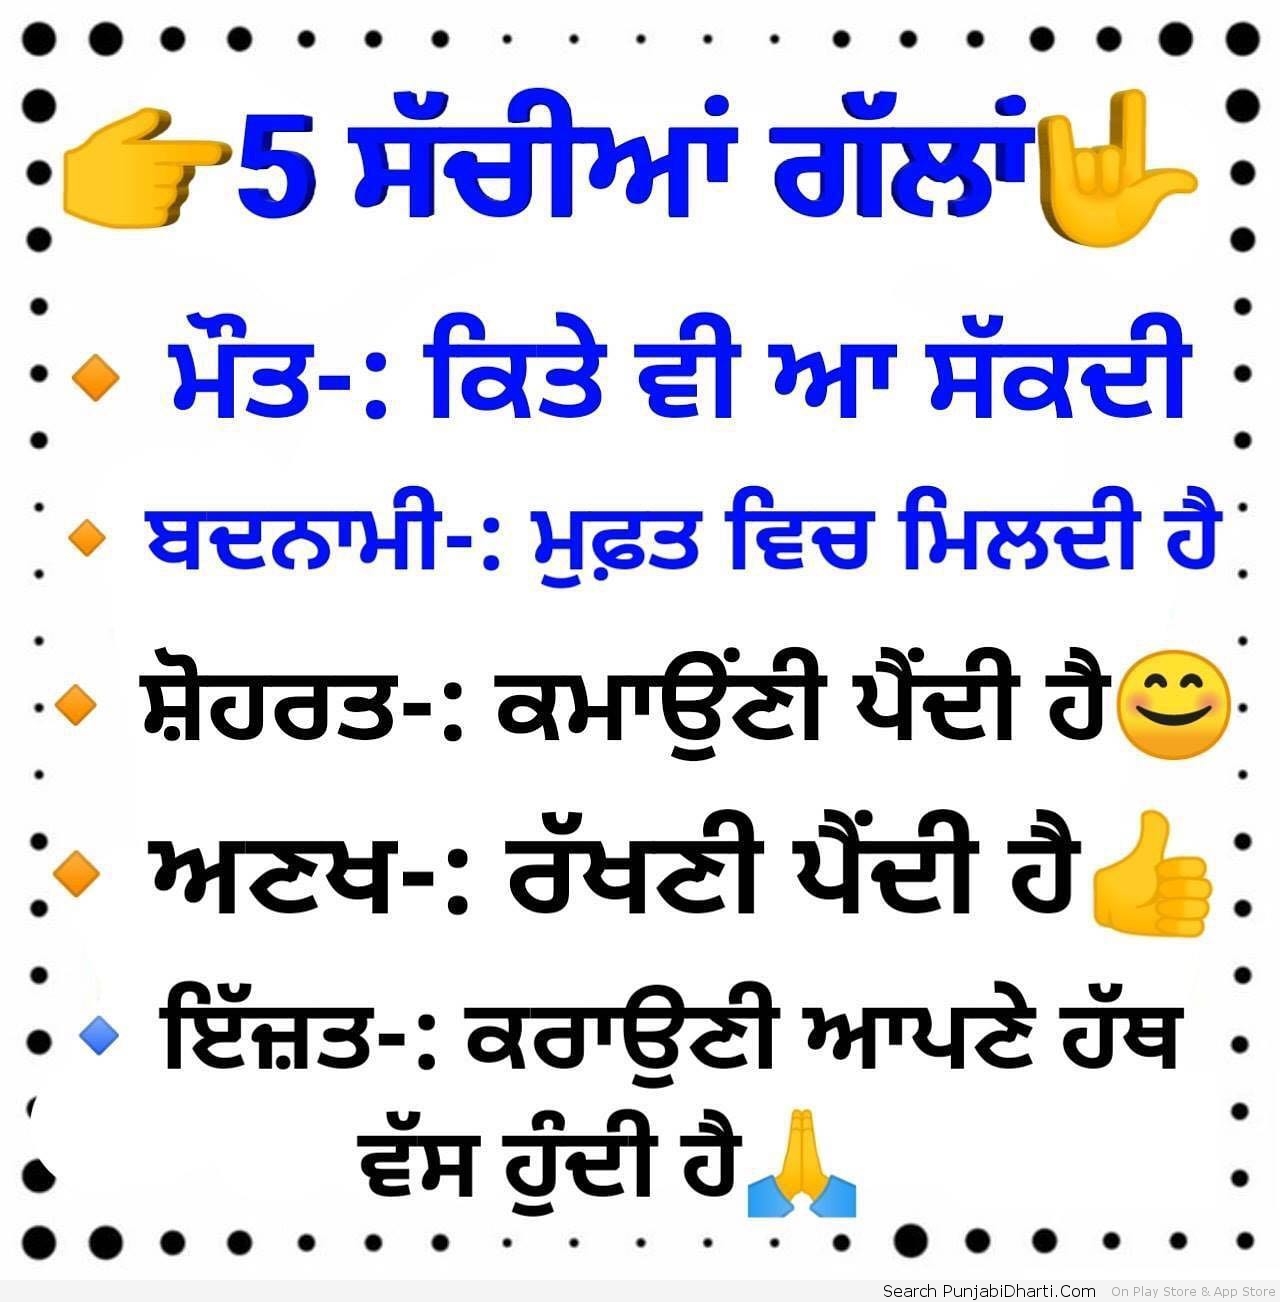 Punjabi Quotes Graphics Images For Facebook Whatsapp Twitter Android application punjabi sachiyan gallan 2019 developed by desicrew is listed under category photography. punjabi quotes graphics images for